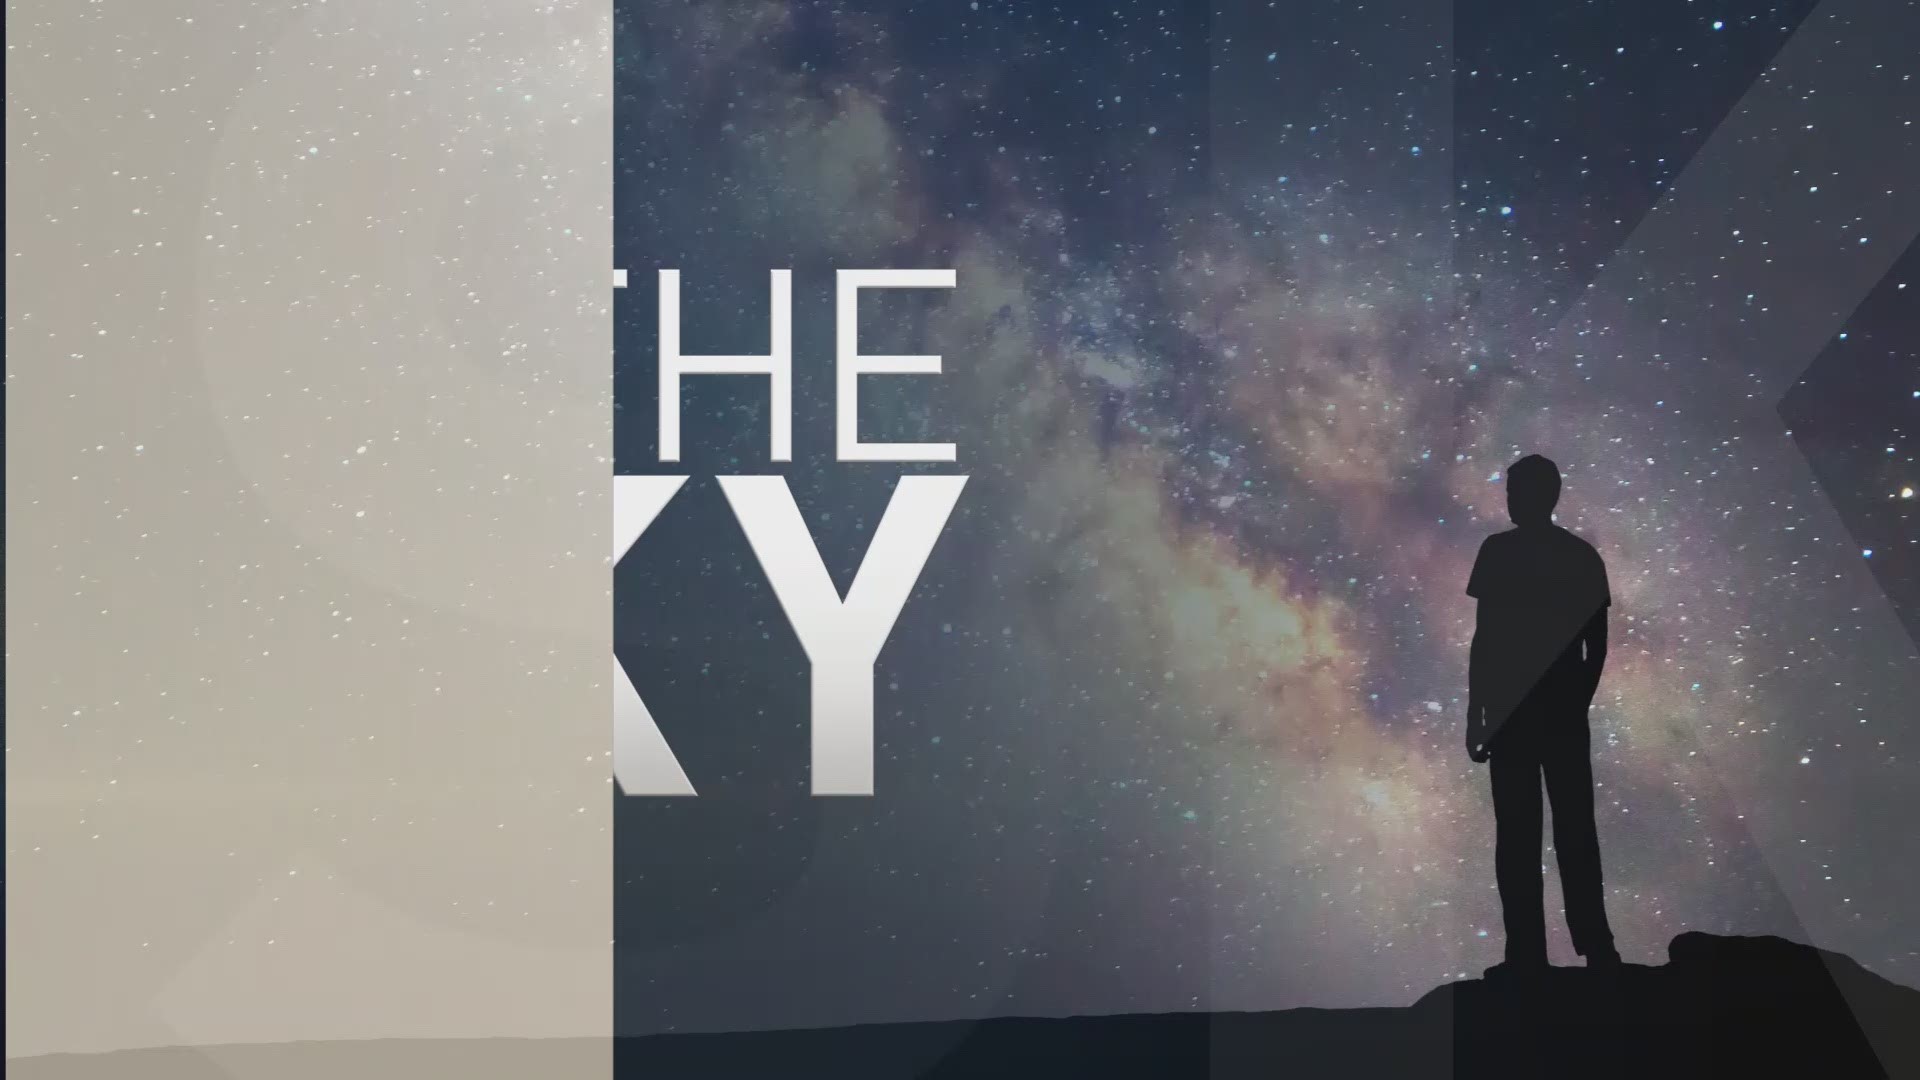 Why does Mars dominate our evening sky, but only for the next couple of weeks? Learn more in this edition of "In the Sky" with Jay Reynolds (@reynoldsastro)